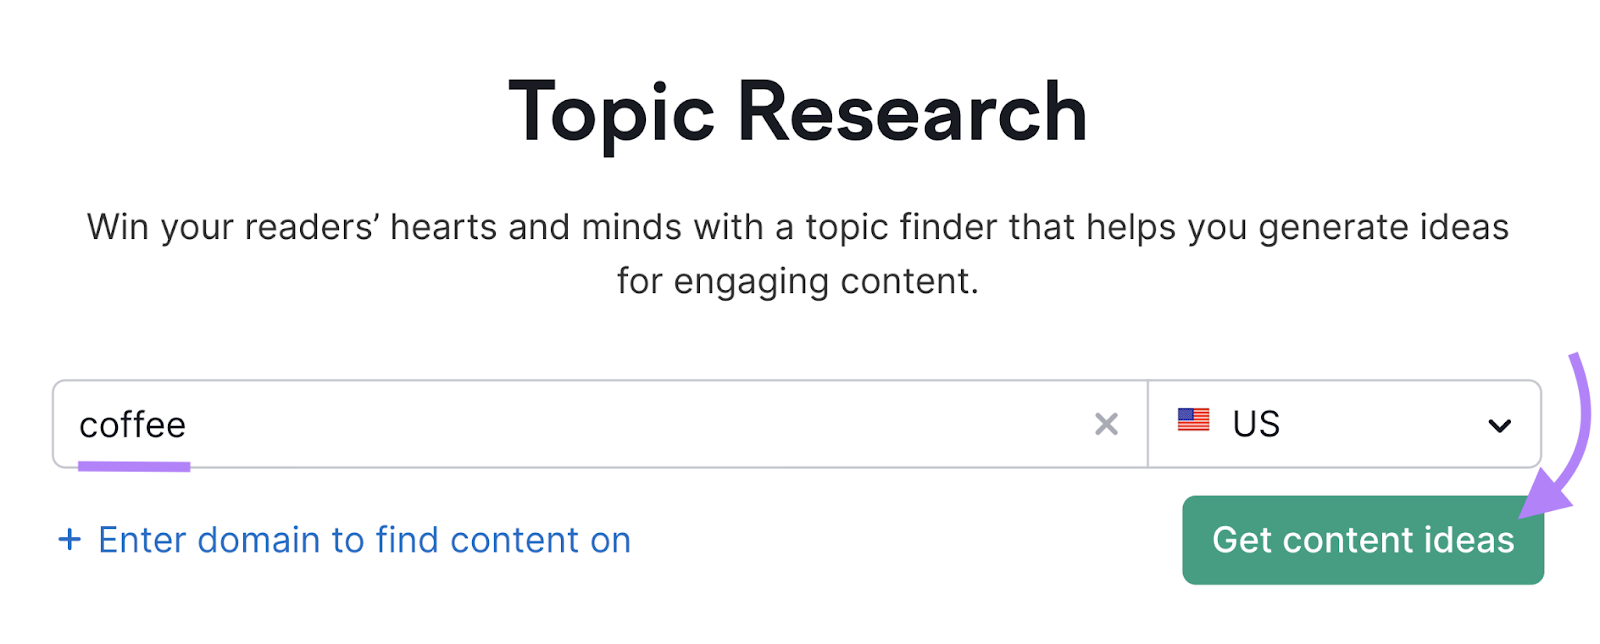 "coffee" entered into the Topic Research tool search bar